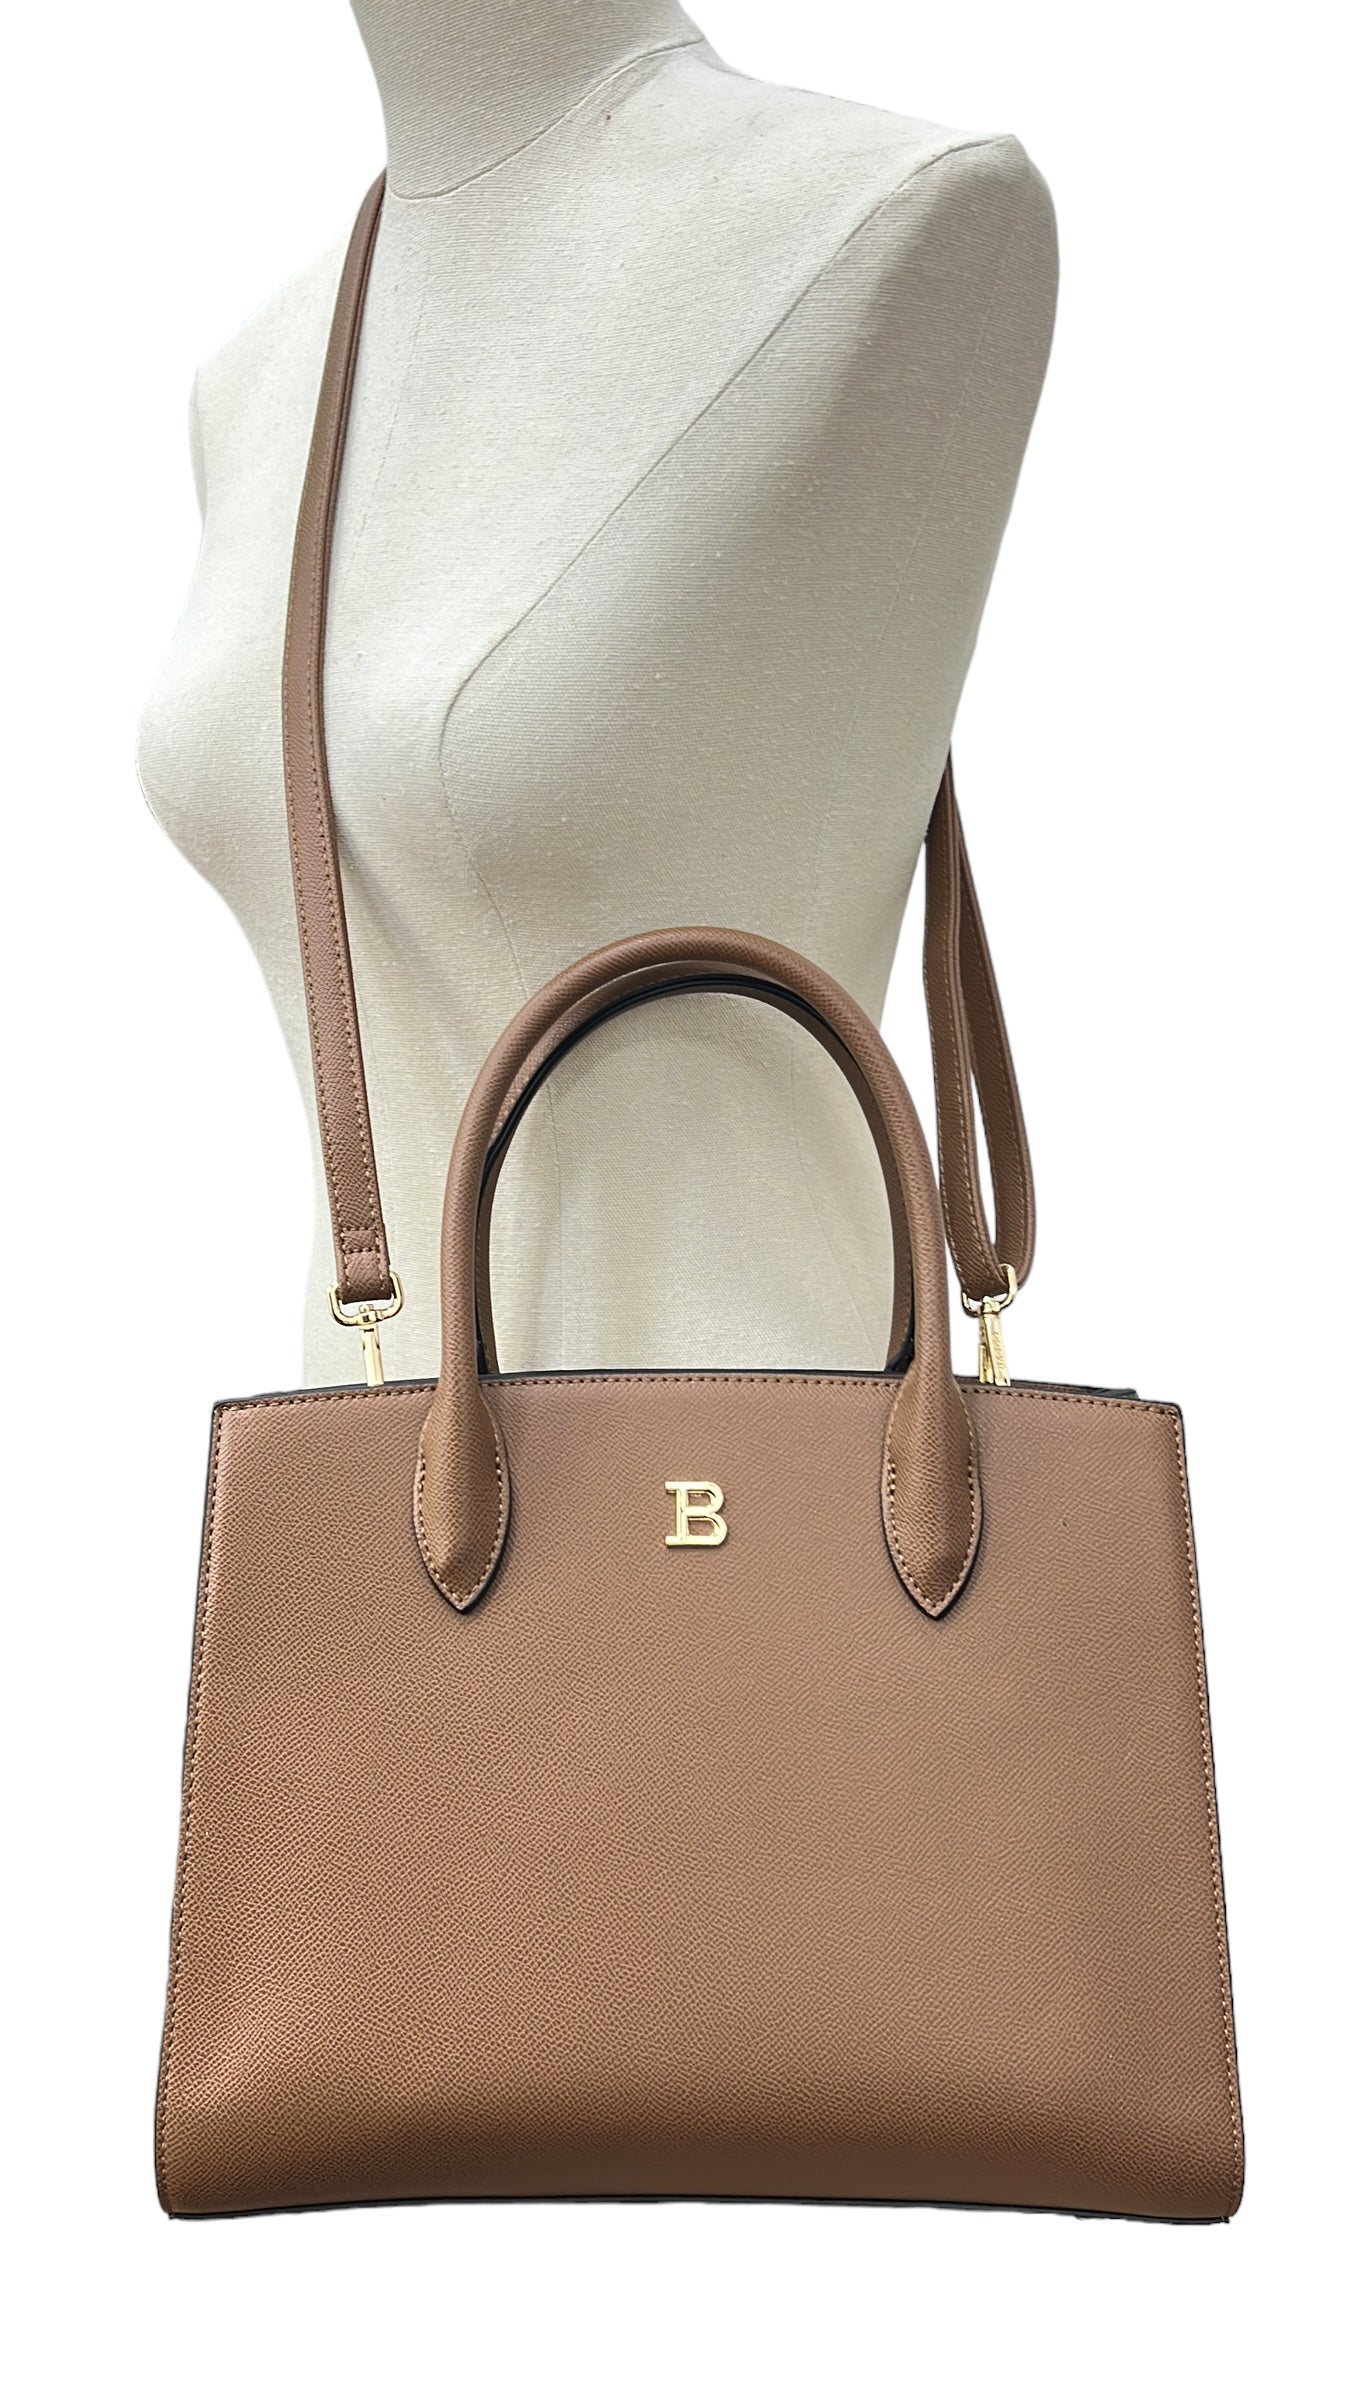 BAGCO TEXTURED STRUCTURED BAG IN BROWN